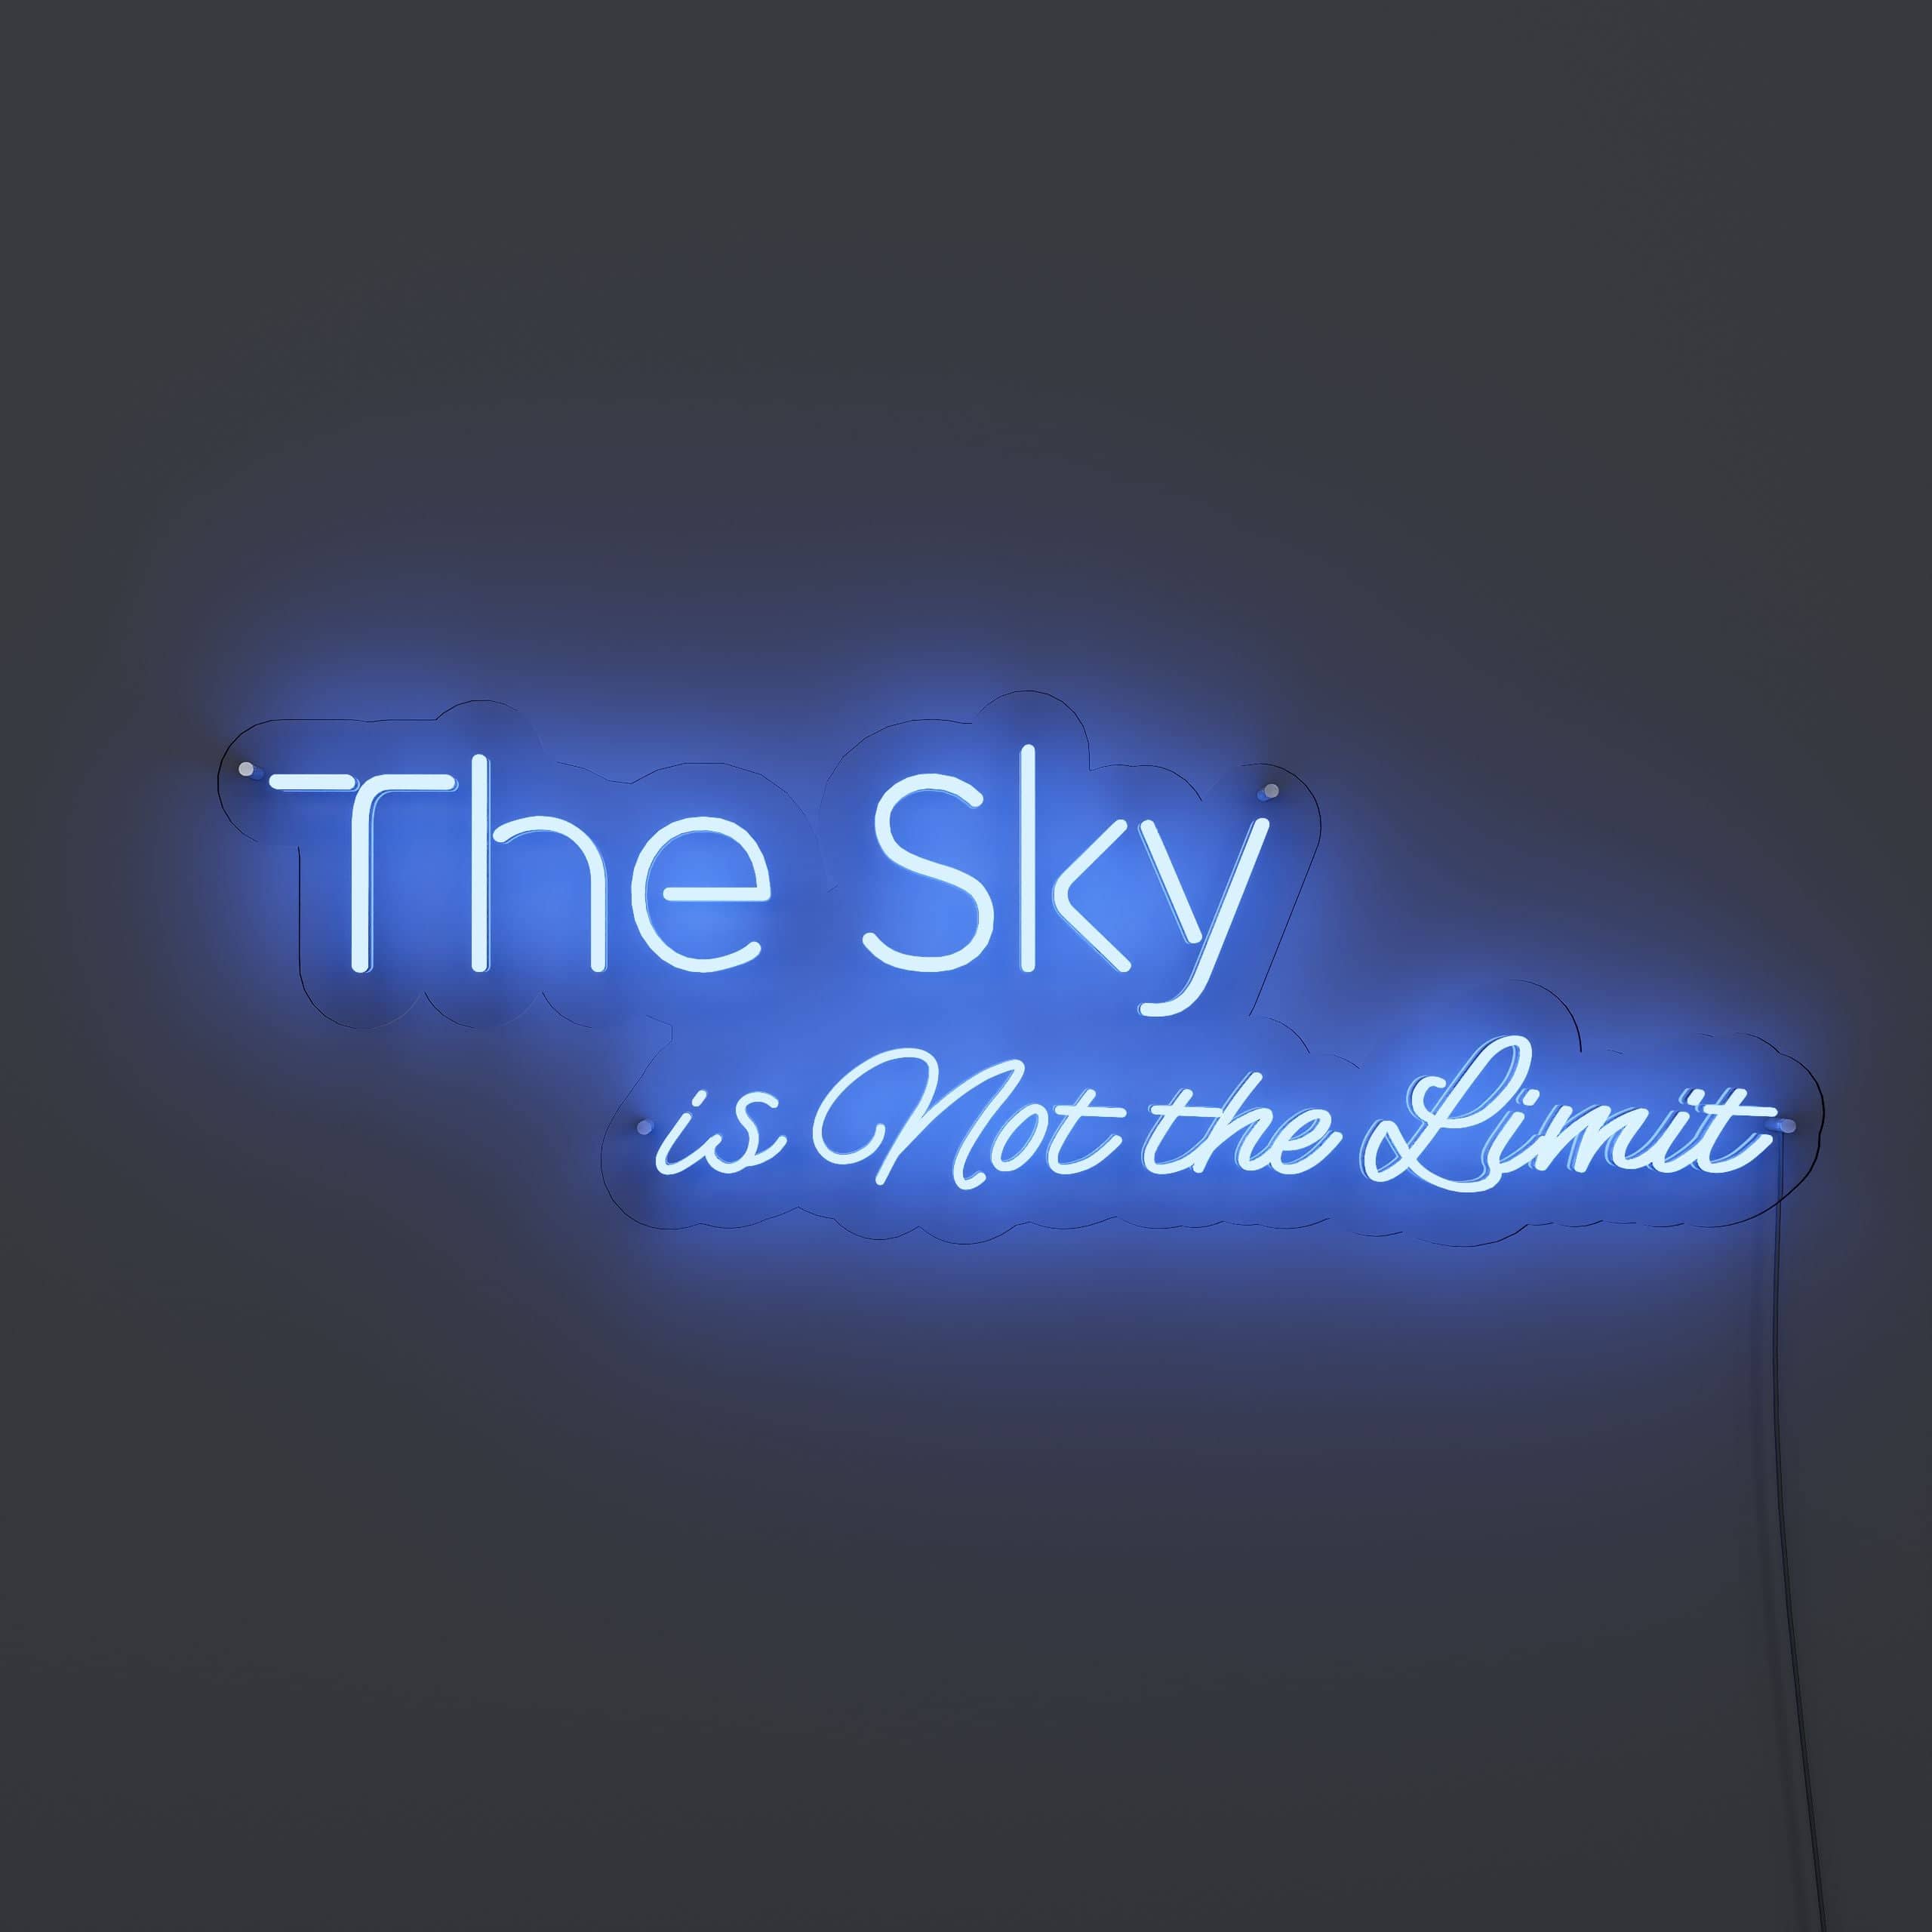 expand-your-horizons,-transcend-the-sky-neon-sign-lite